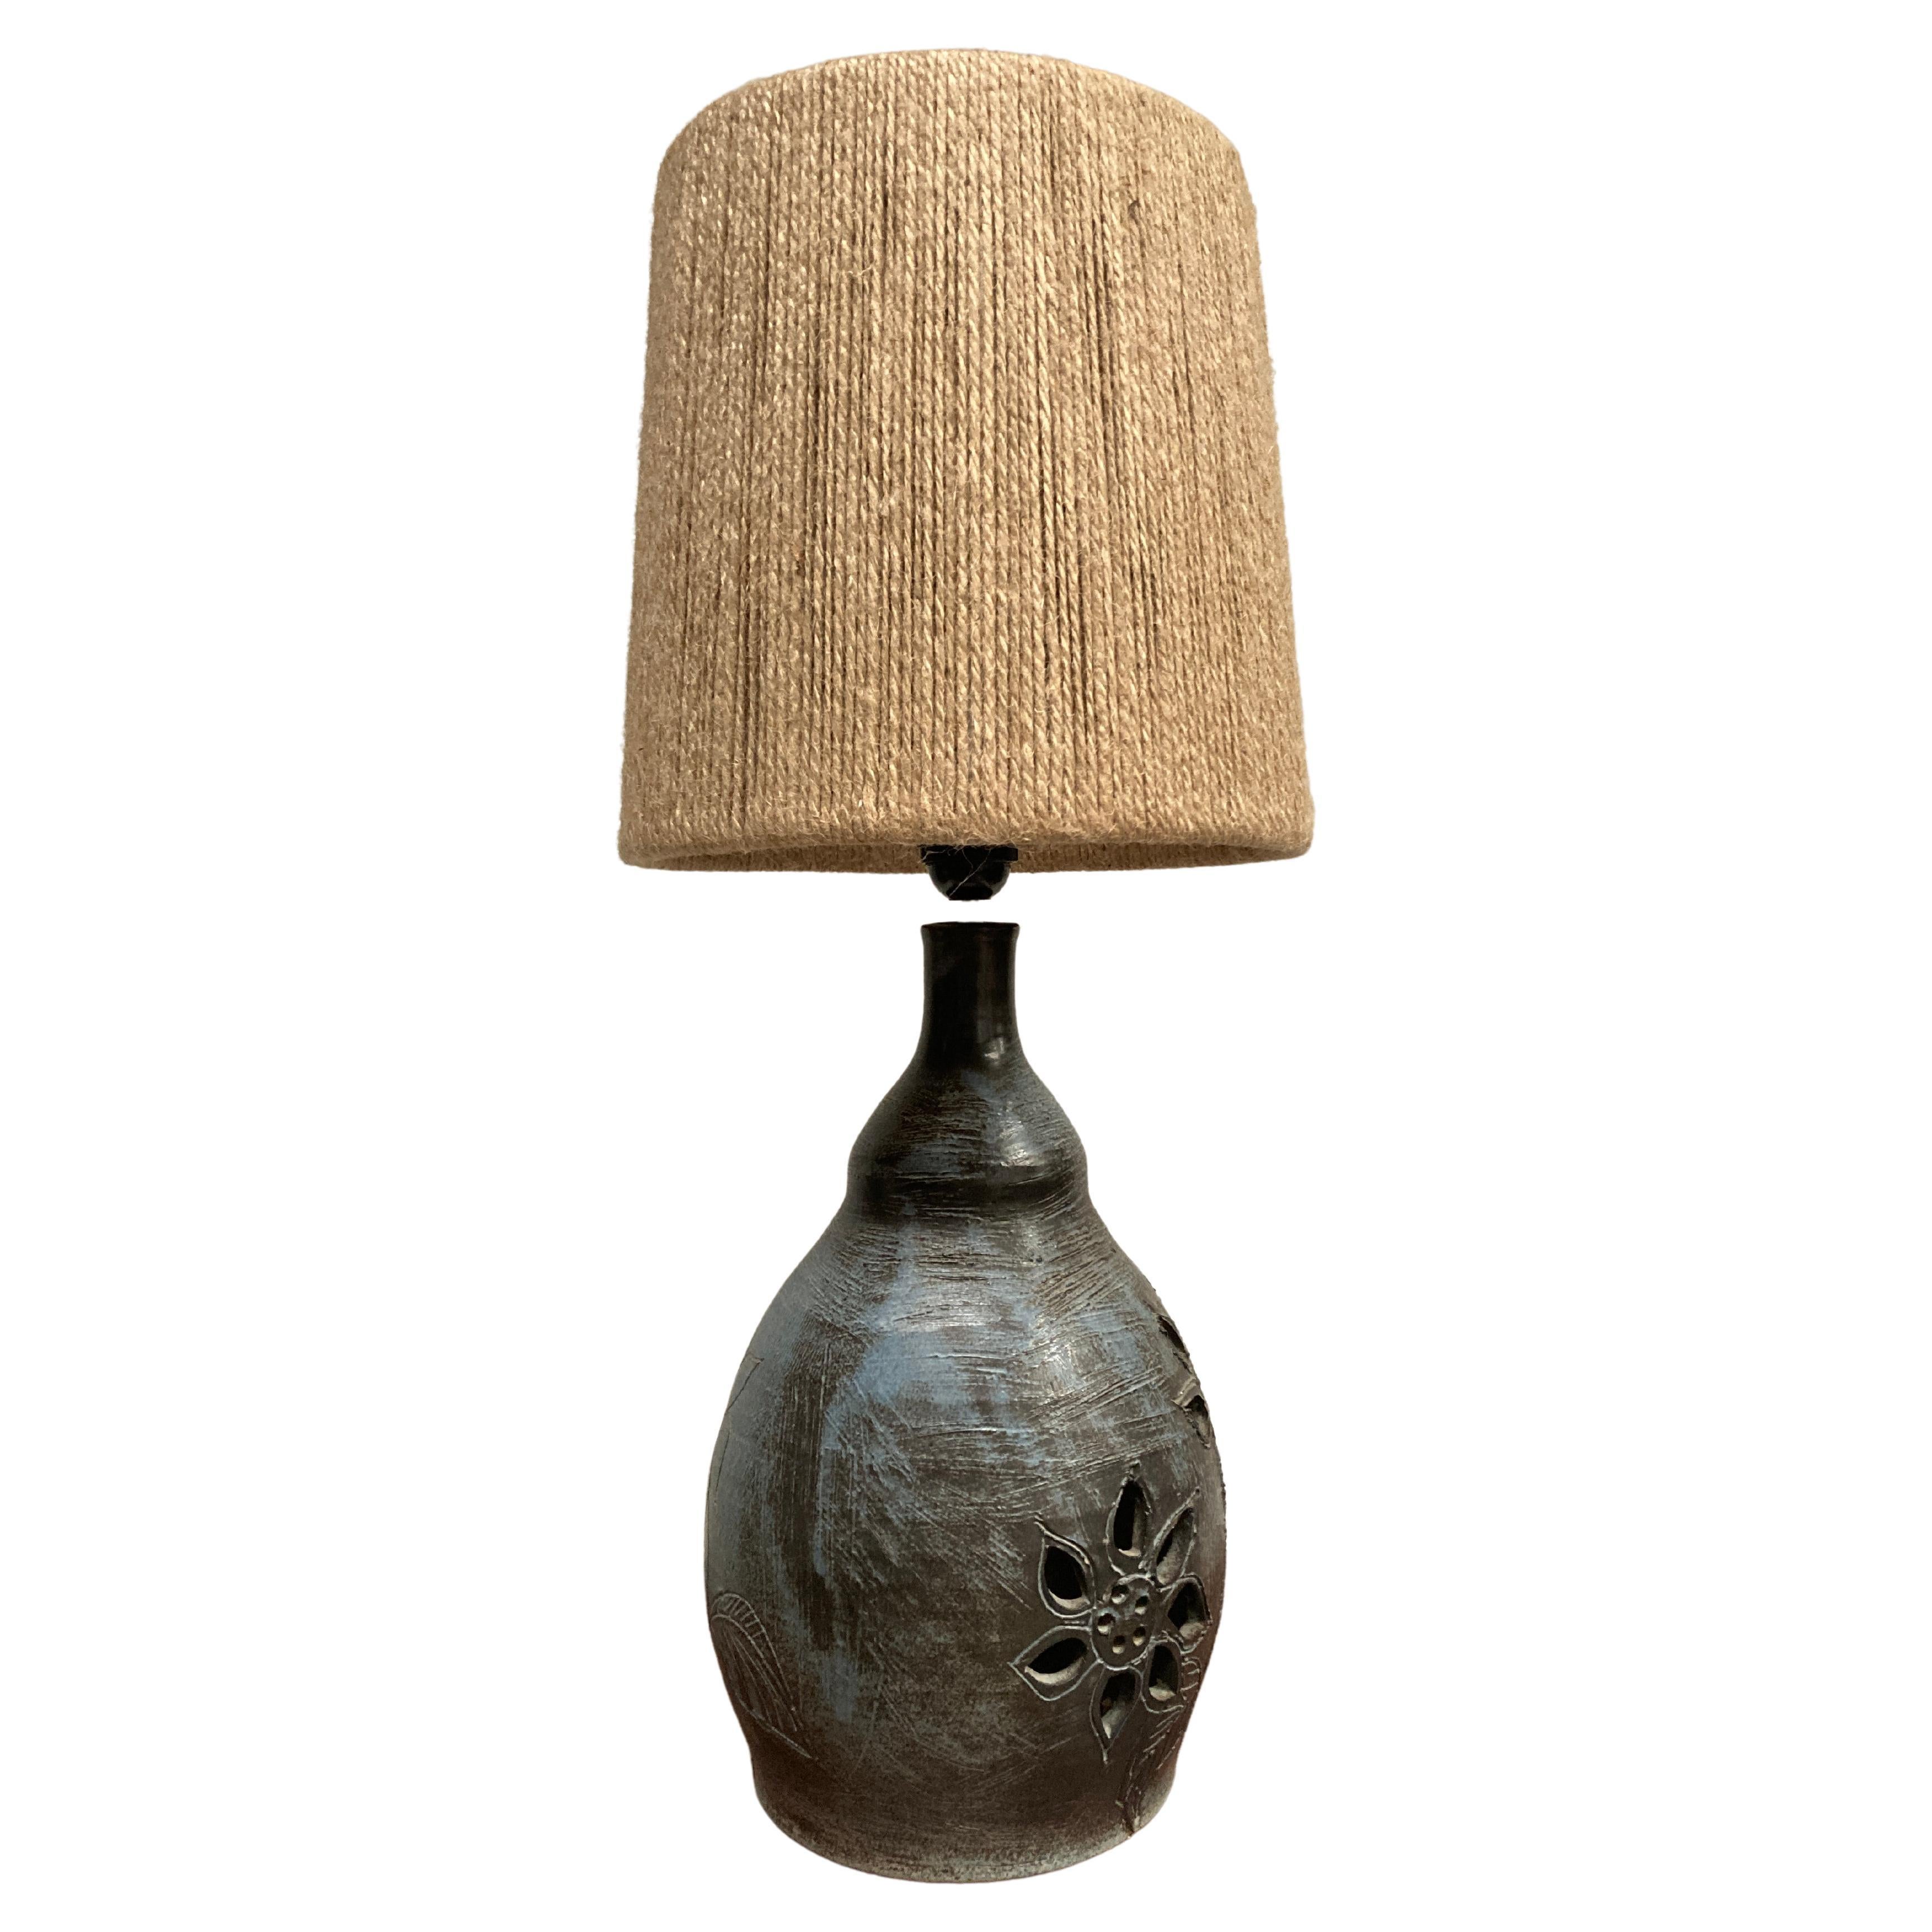 1970's Studio pottery lamp from Vallauris 